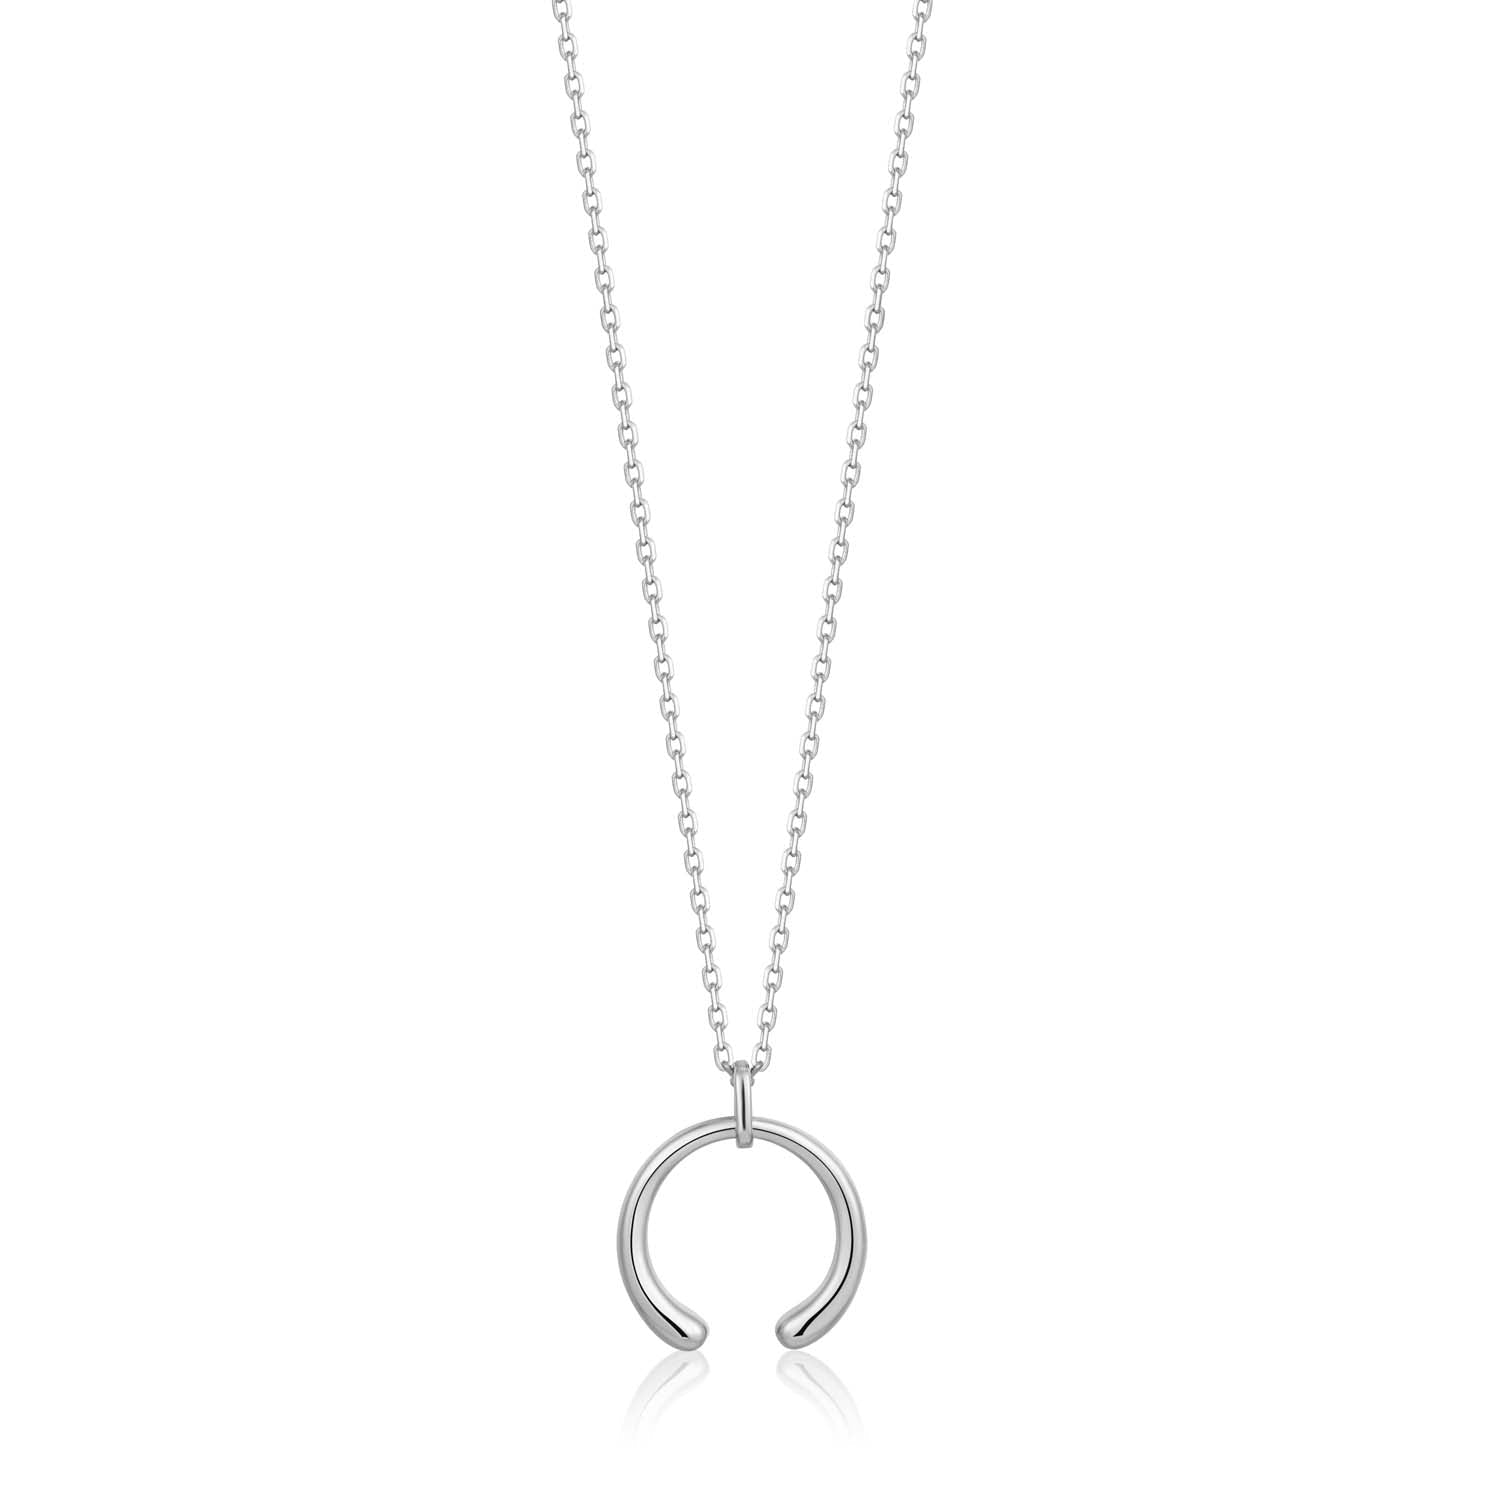 Ania Haie Luxe Curve Necklace - Silver Necklaces Ania Haie 